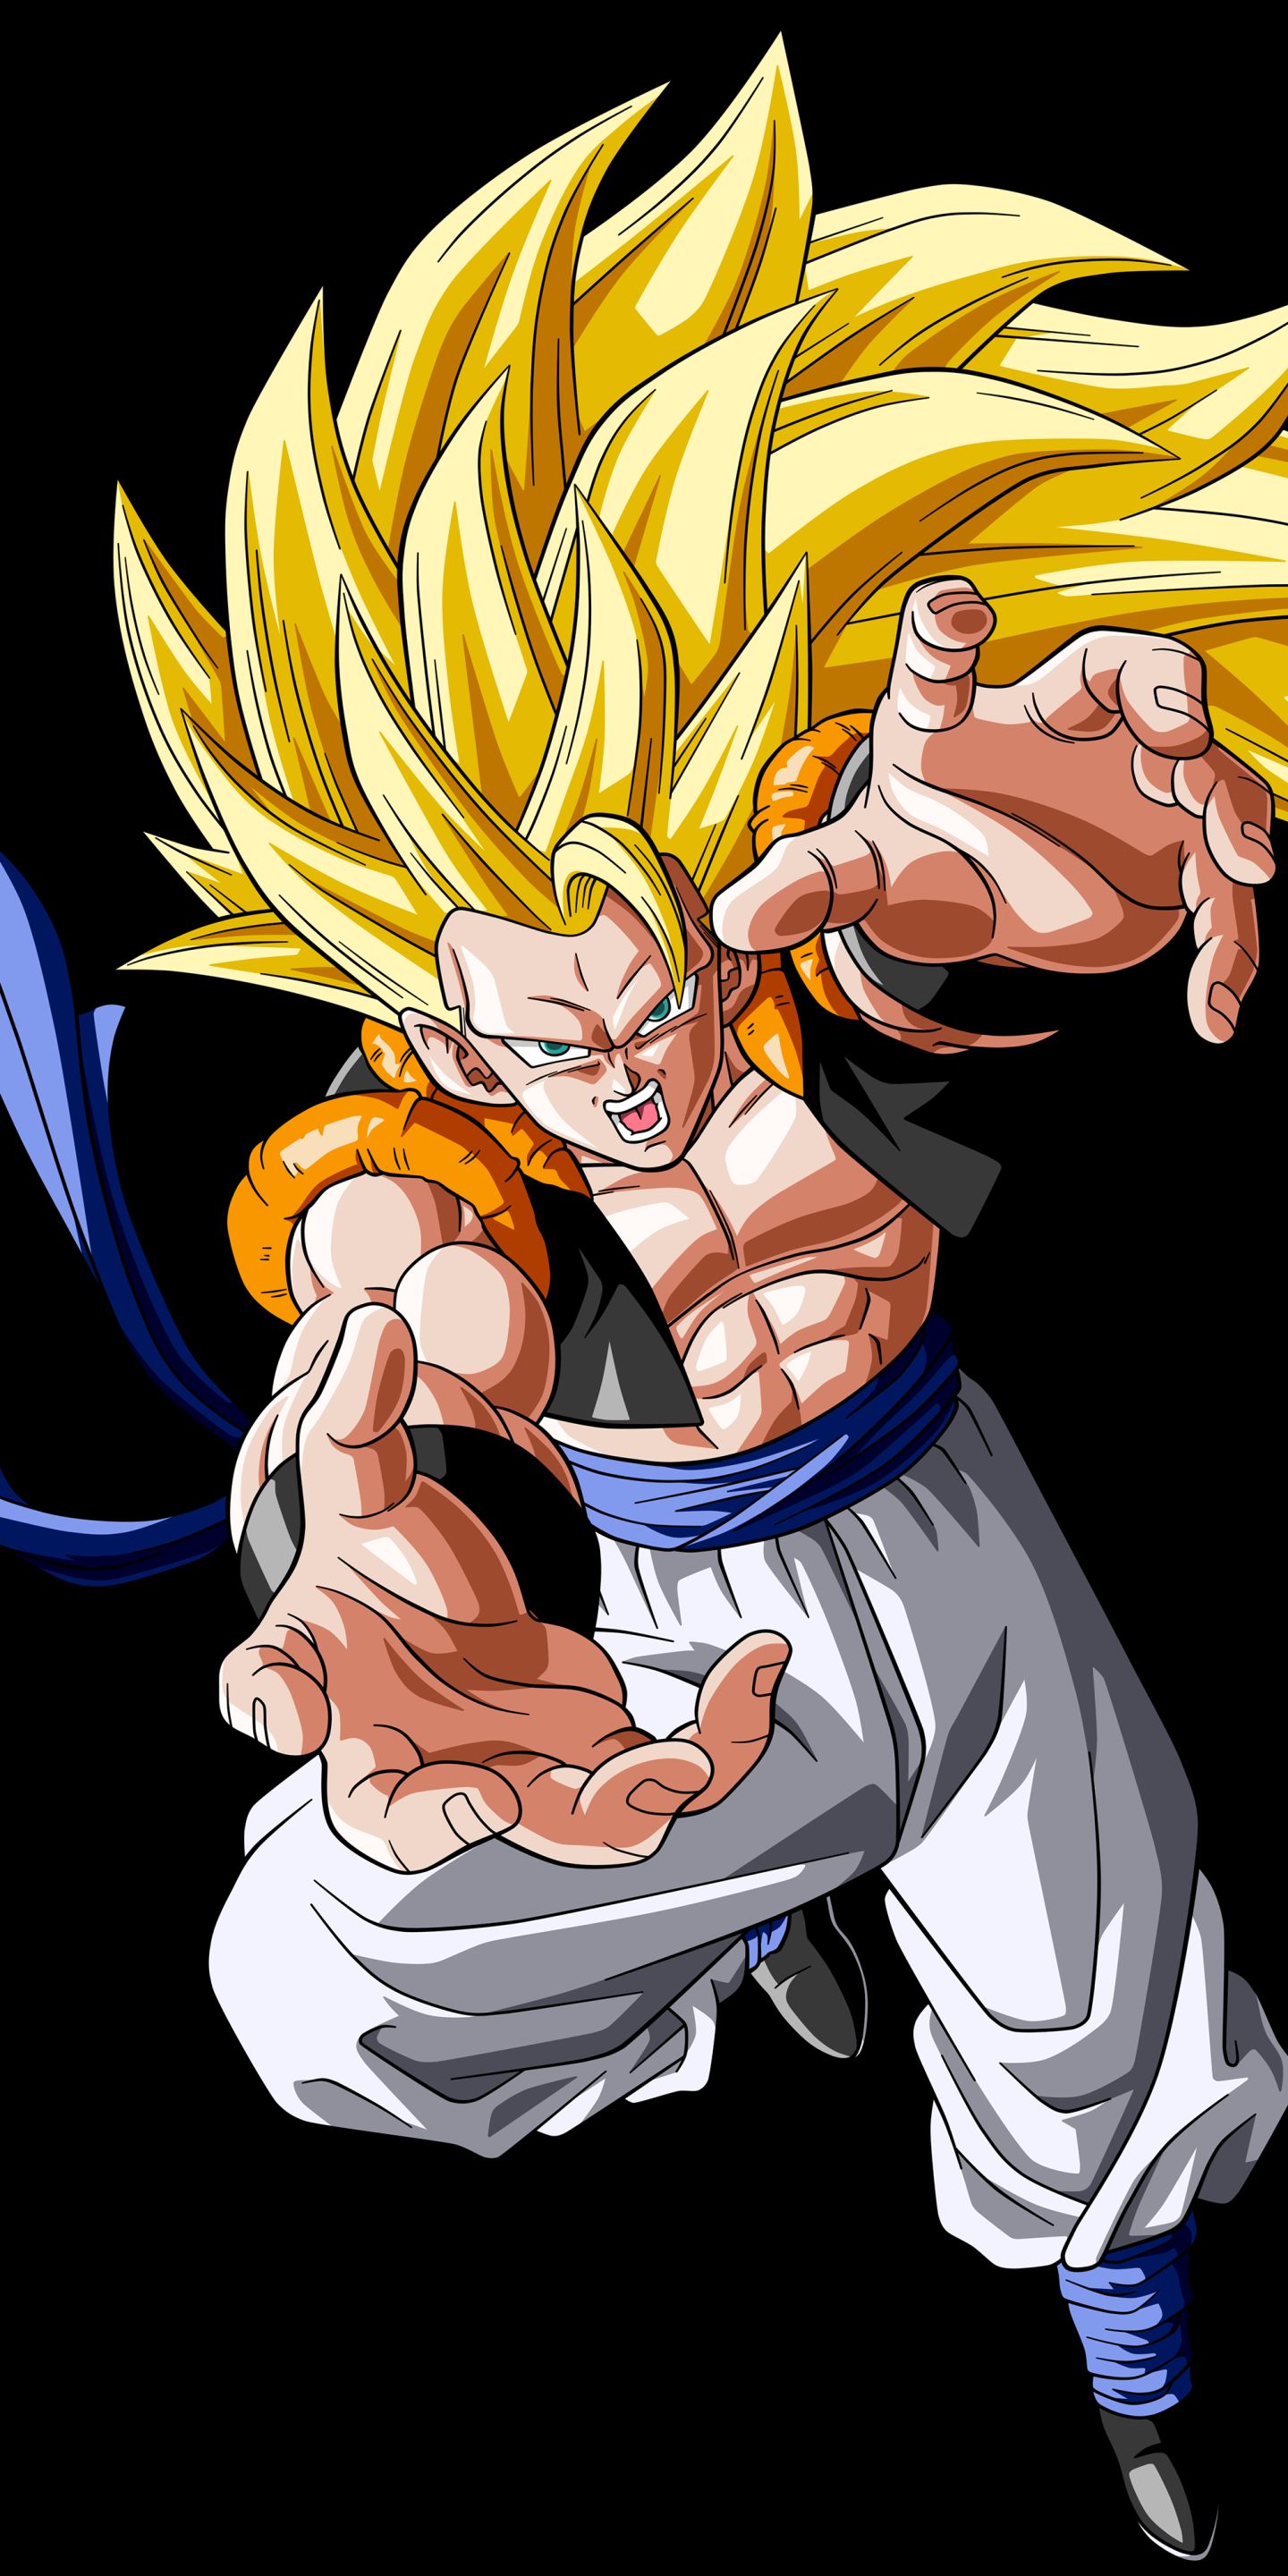 Gogeta (Dragon Ball) wallpapers for desktop, download free Gogeta (Dragon  Ball) pictures and backgrounds for PC